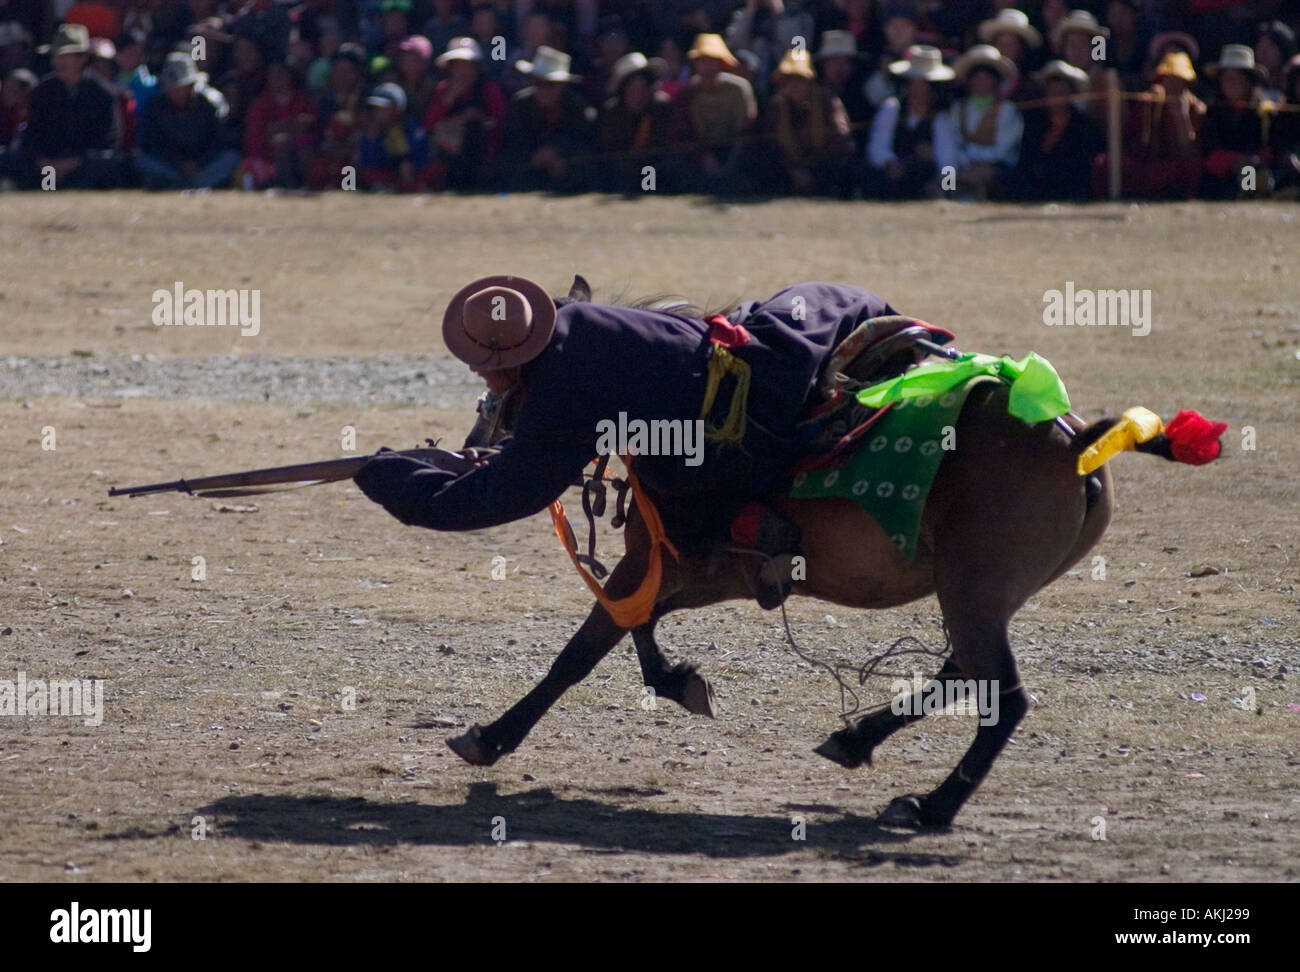 A Khampa competes in rifle shooting contest on horseback at the Litang Horse Festival in Kham Sichuan Province ChinaTibet Stock Photo